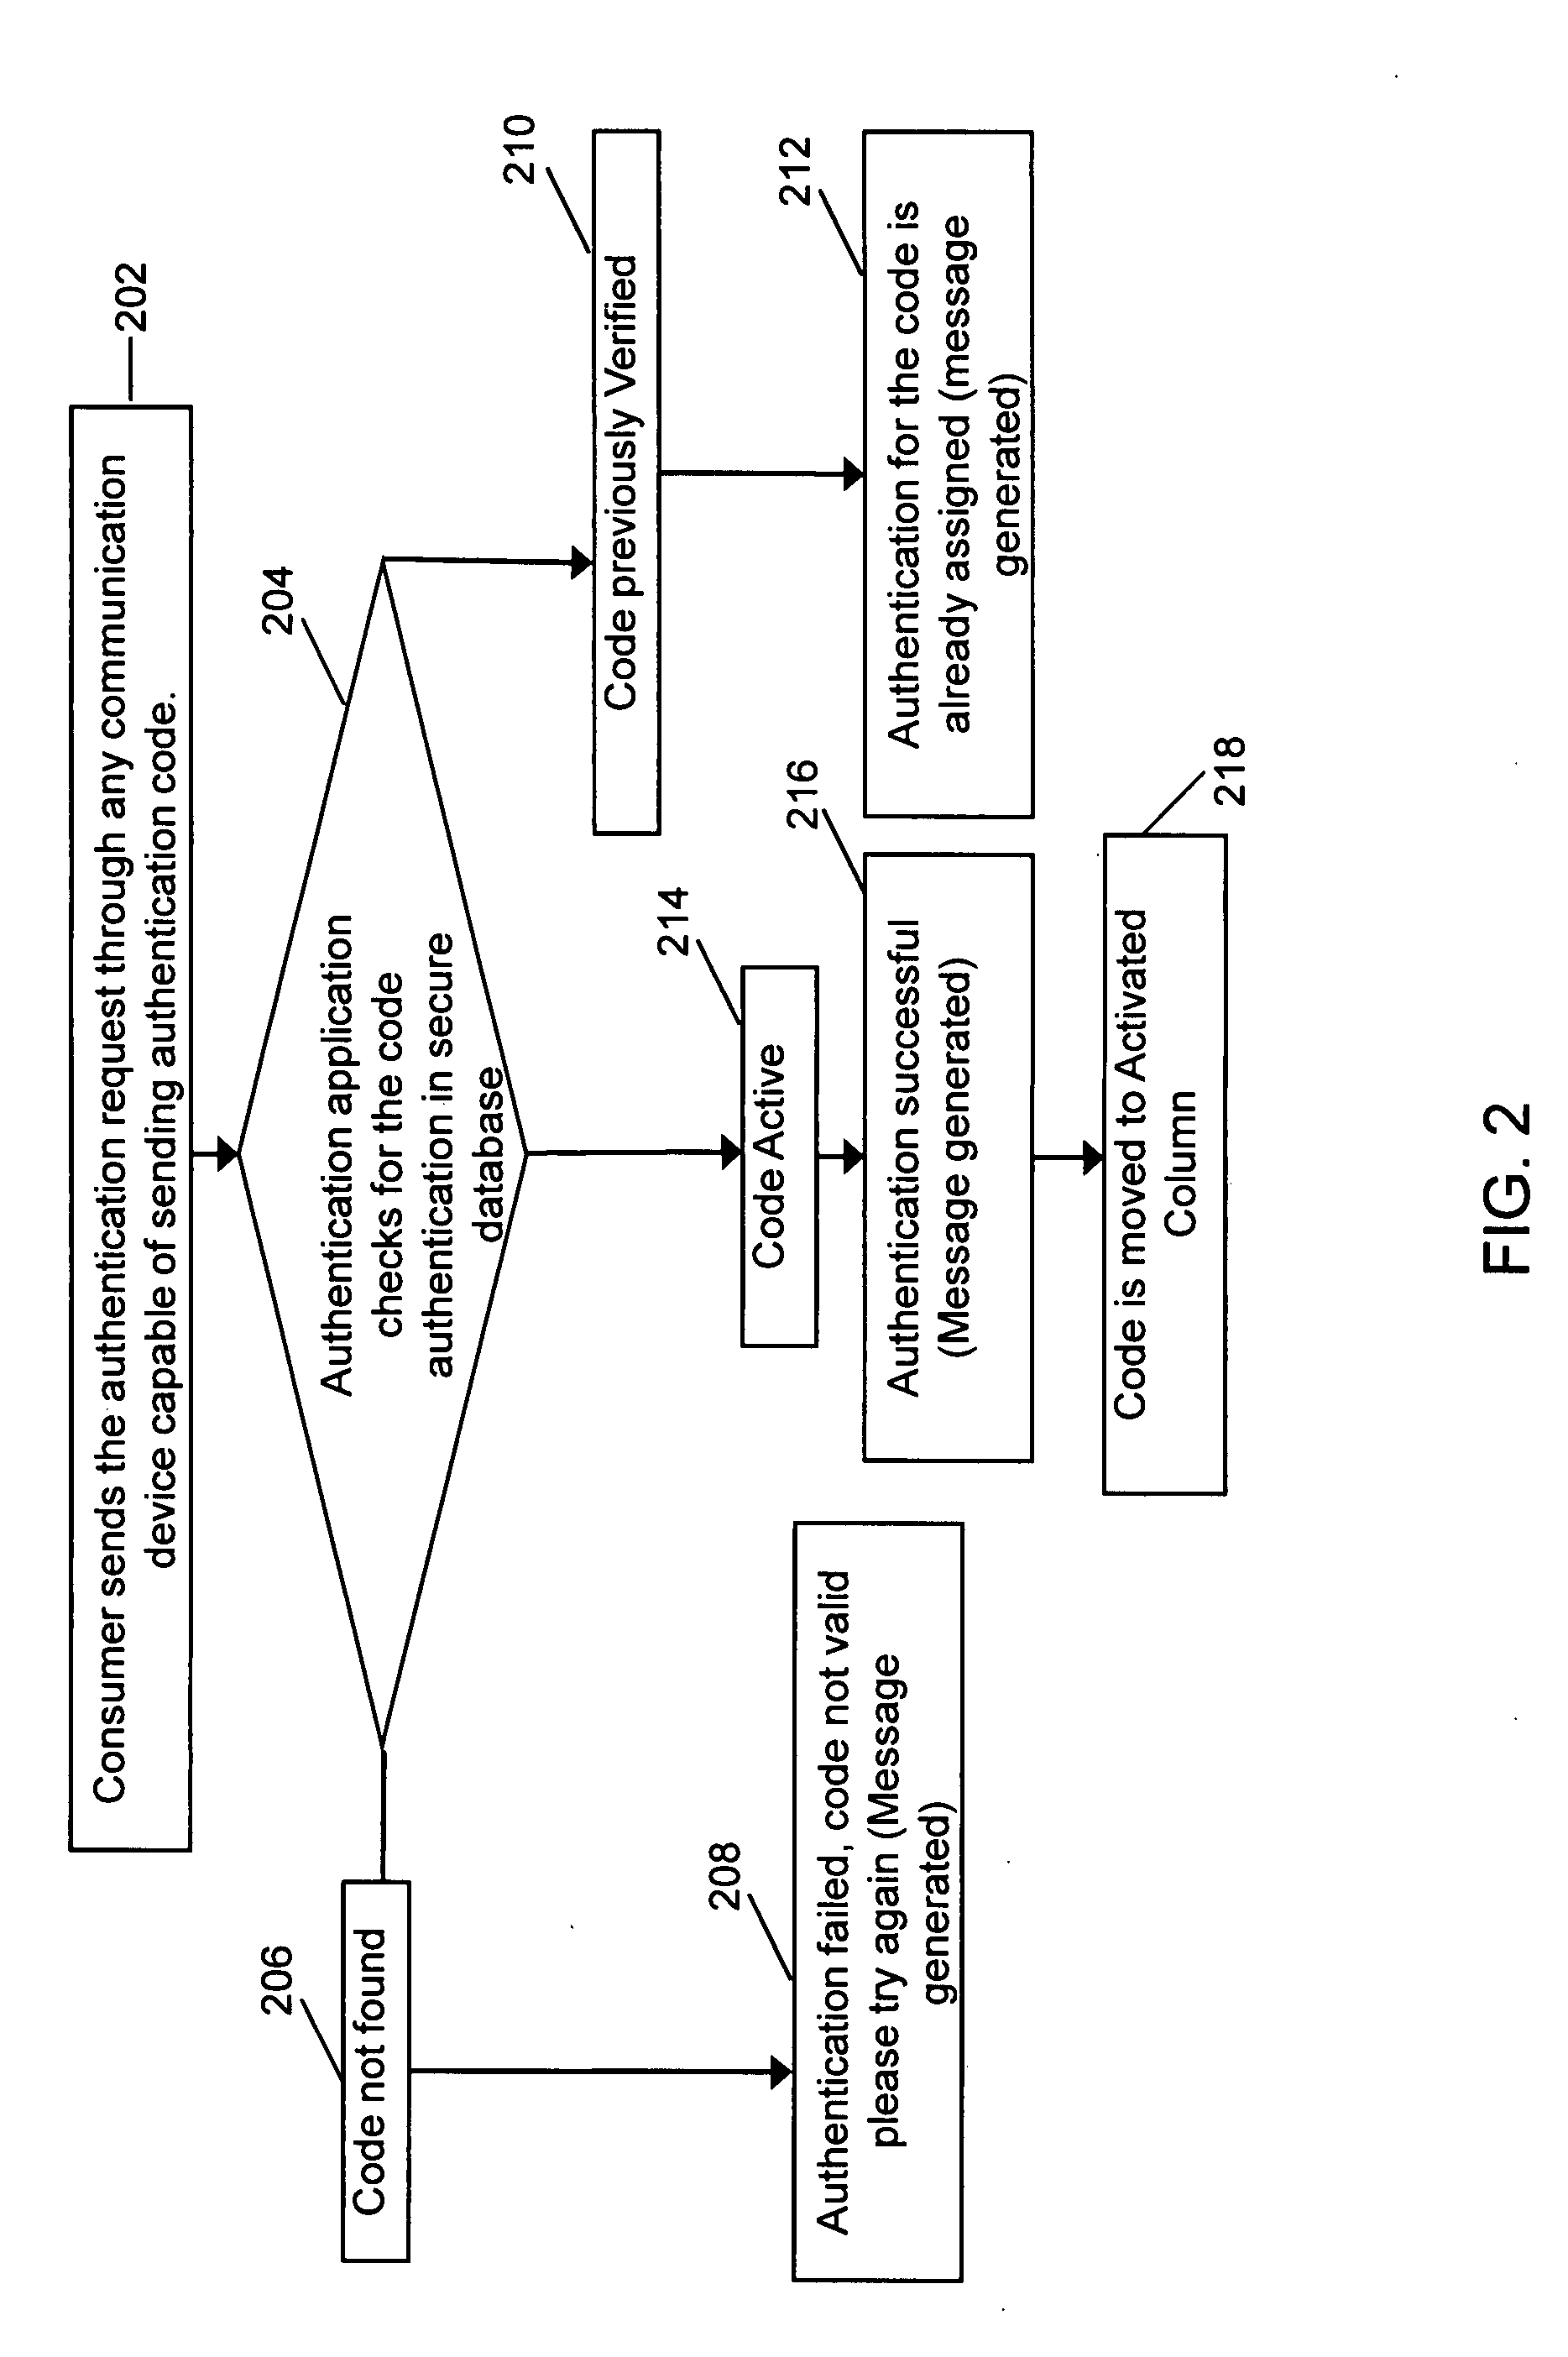 Anti-counterfeiting system and method for conducting retail analysis